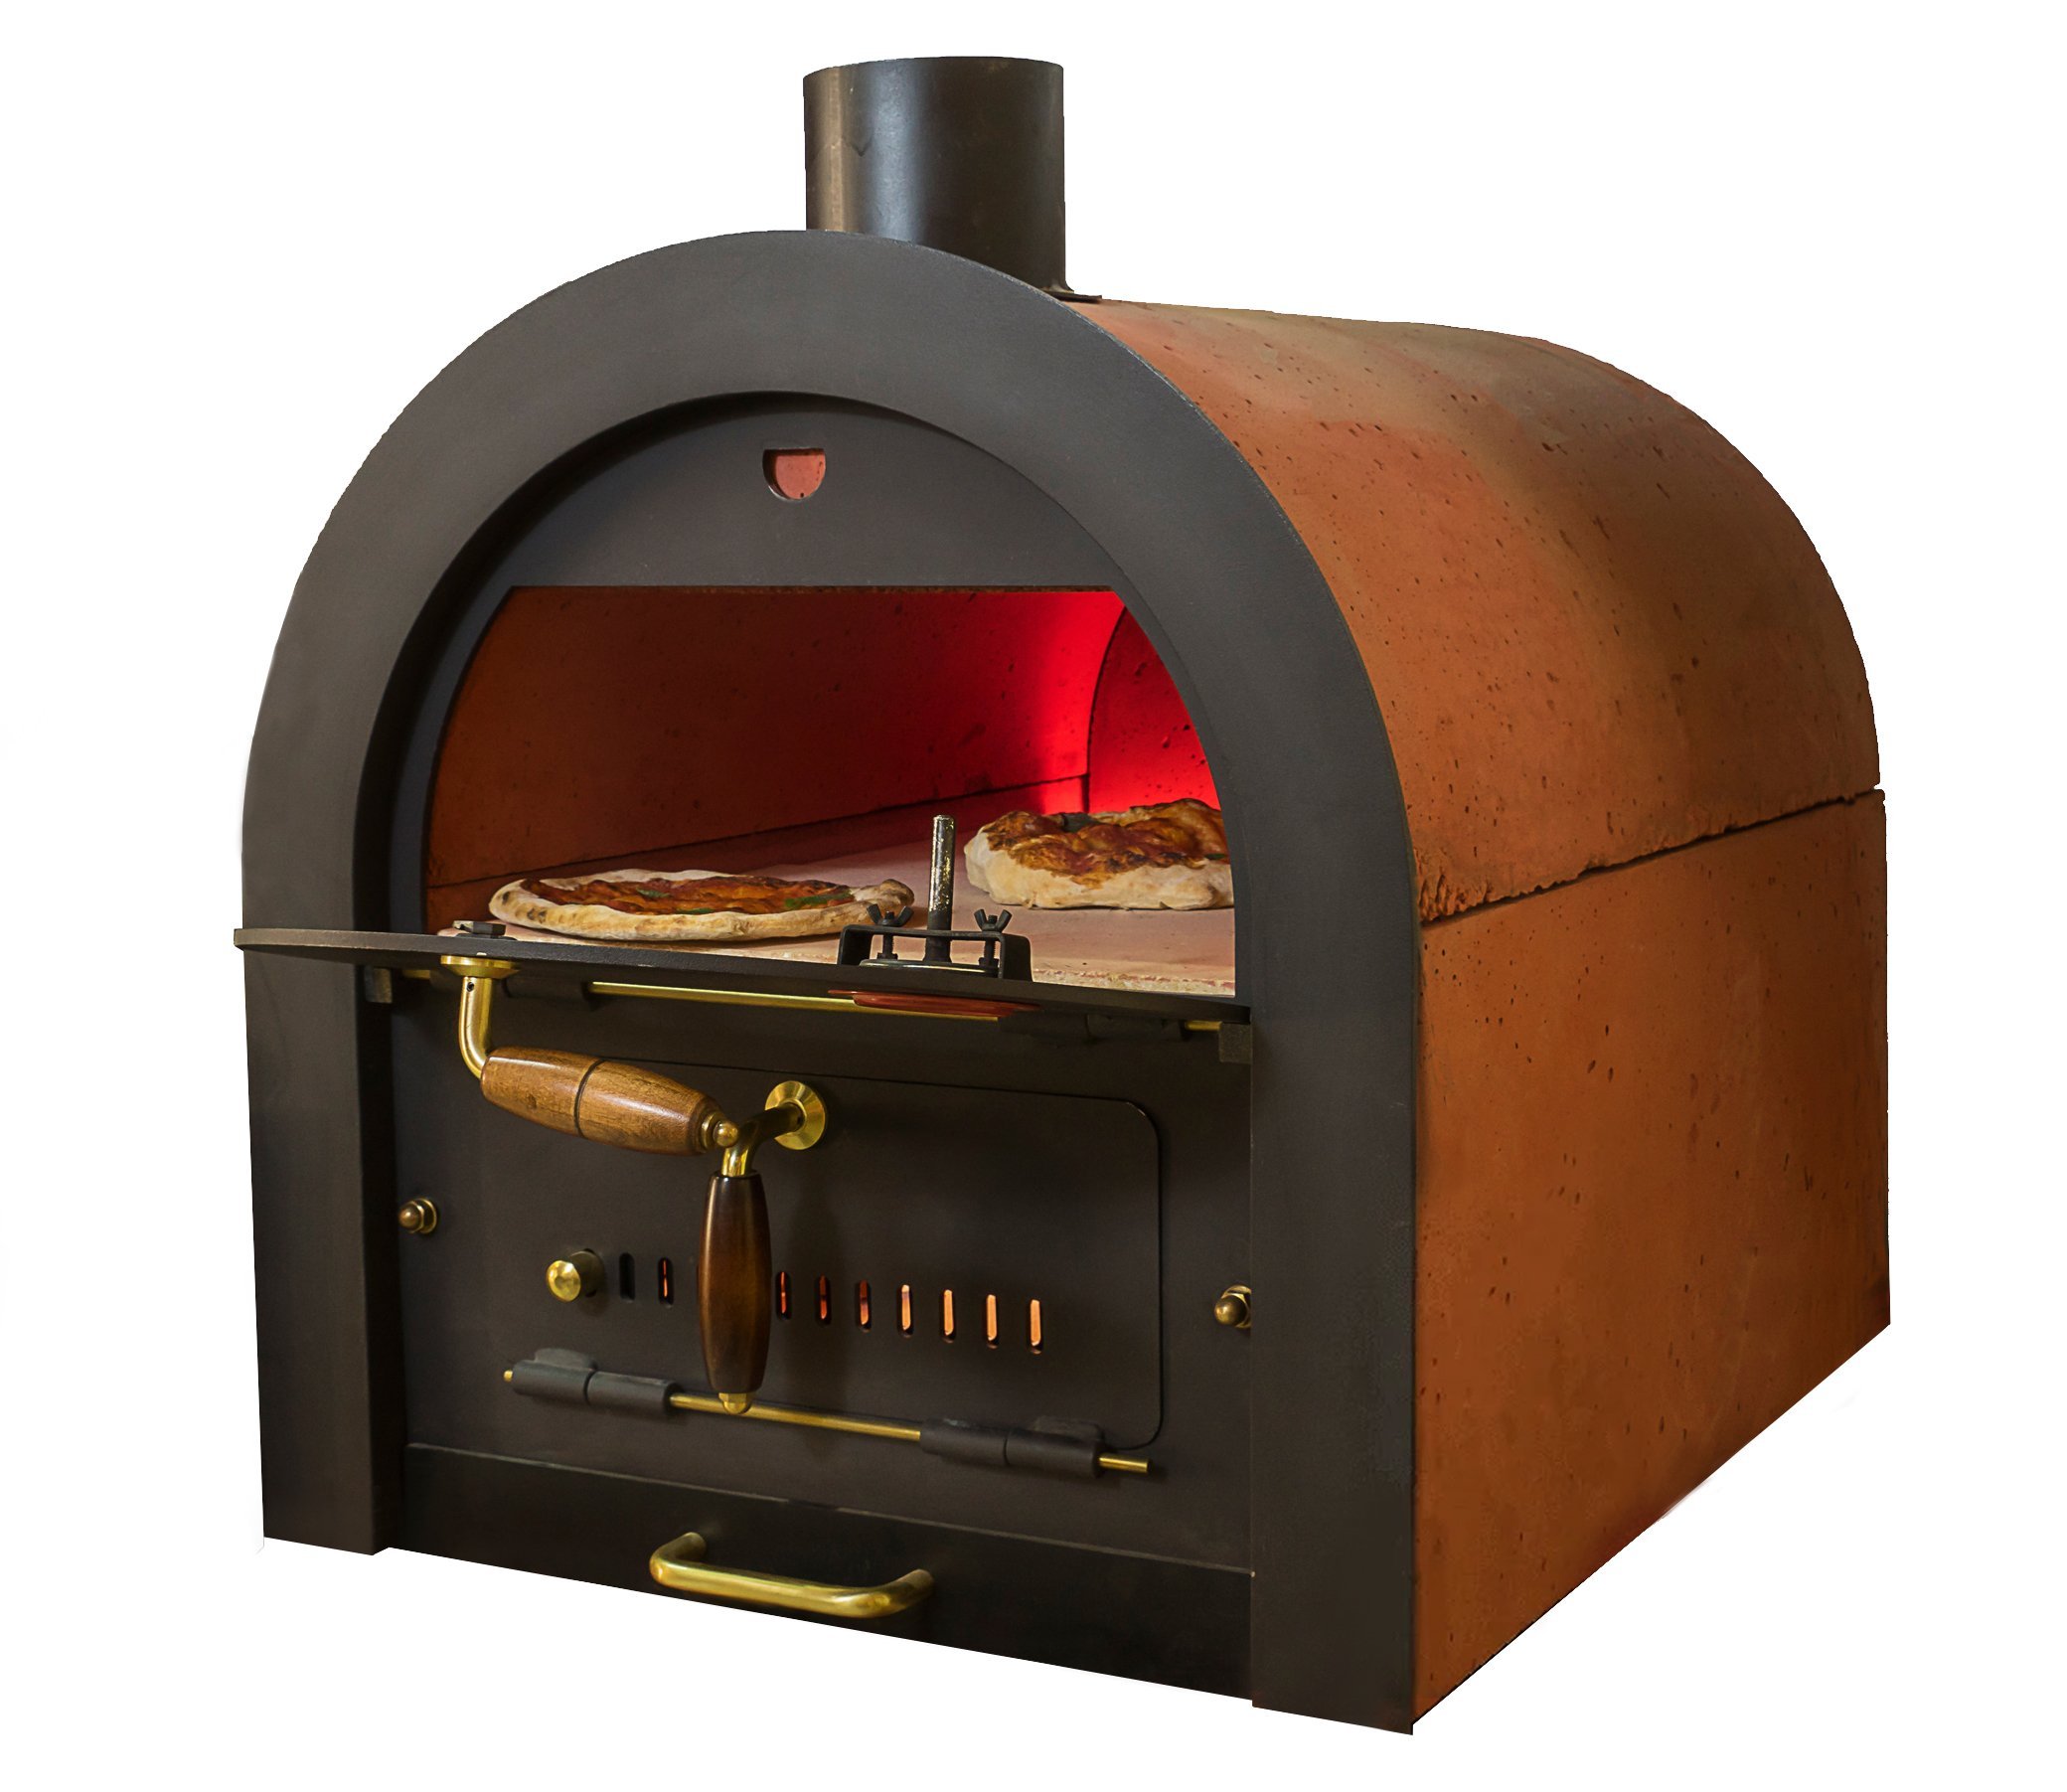 Wood oven kit with indirect firing, pizza oven Valoriani, 40x60cm baking surface